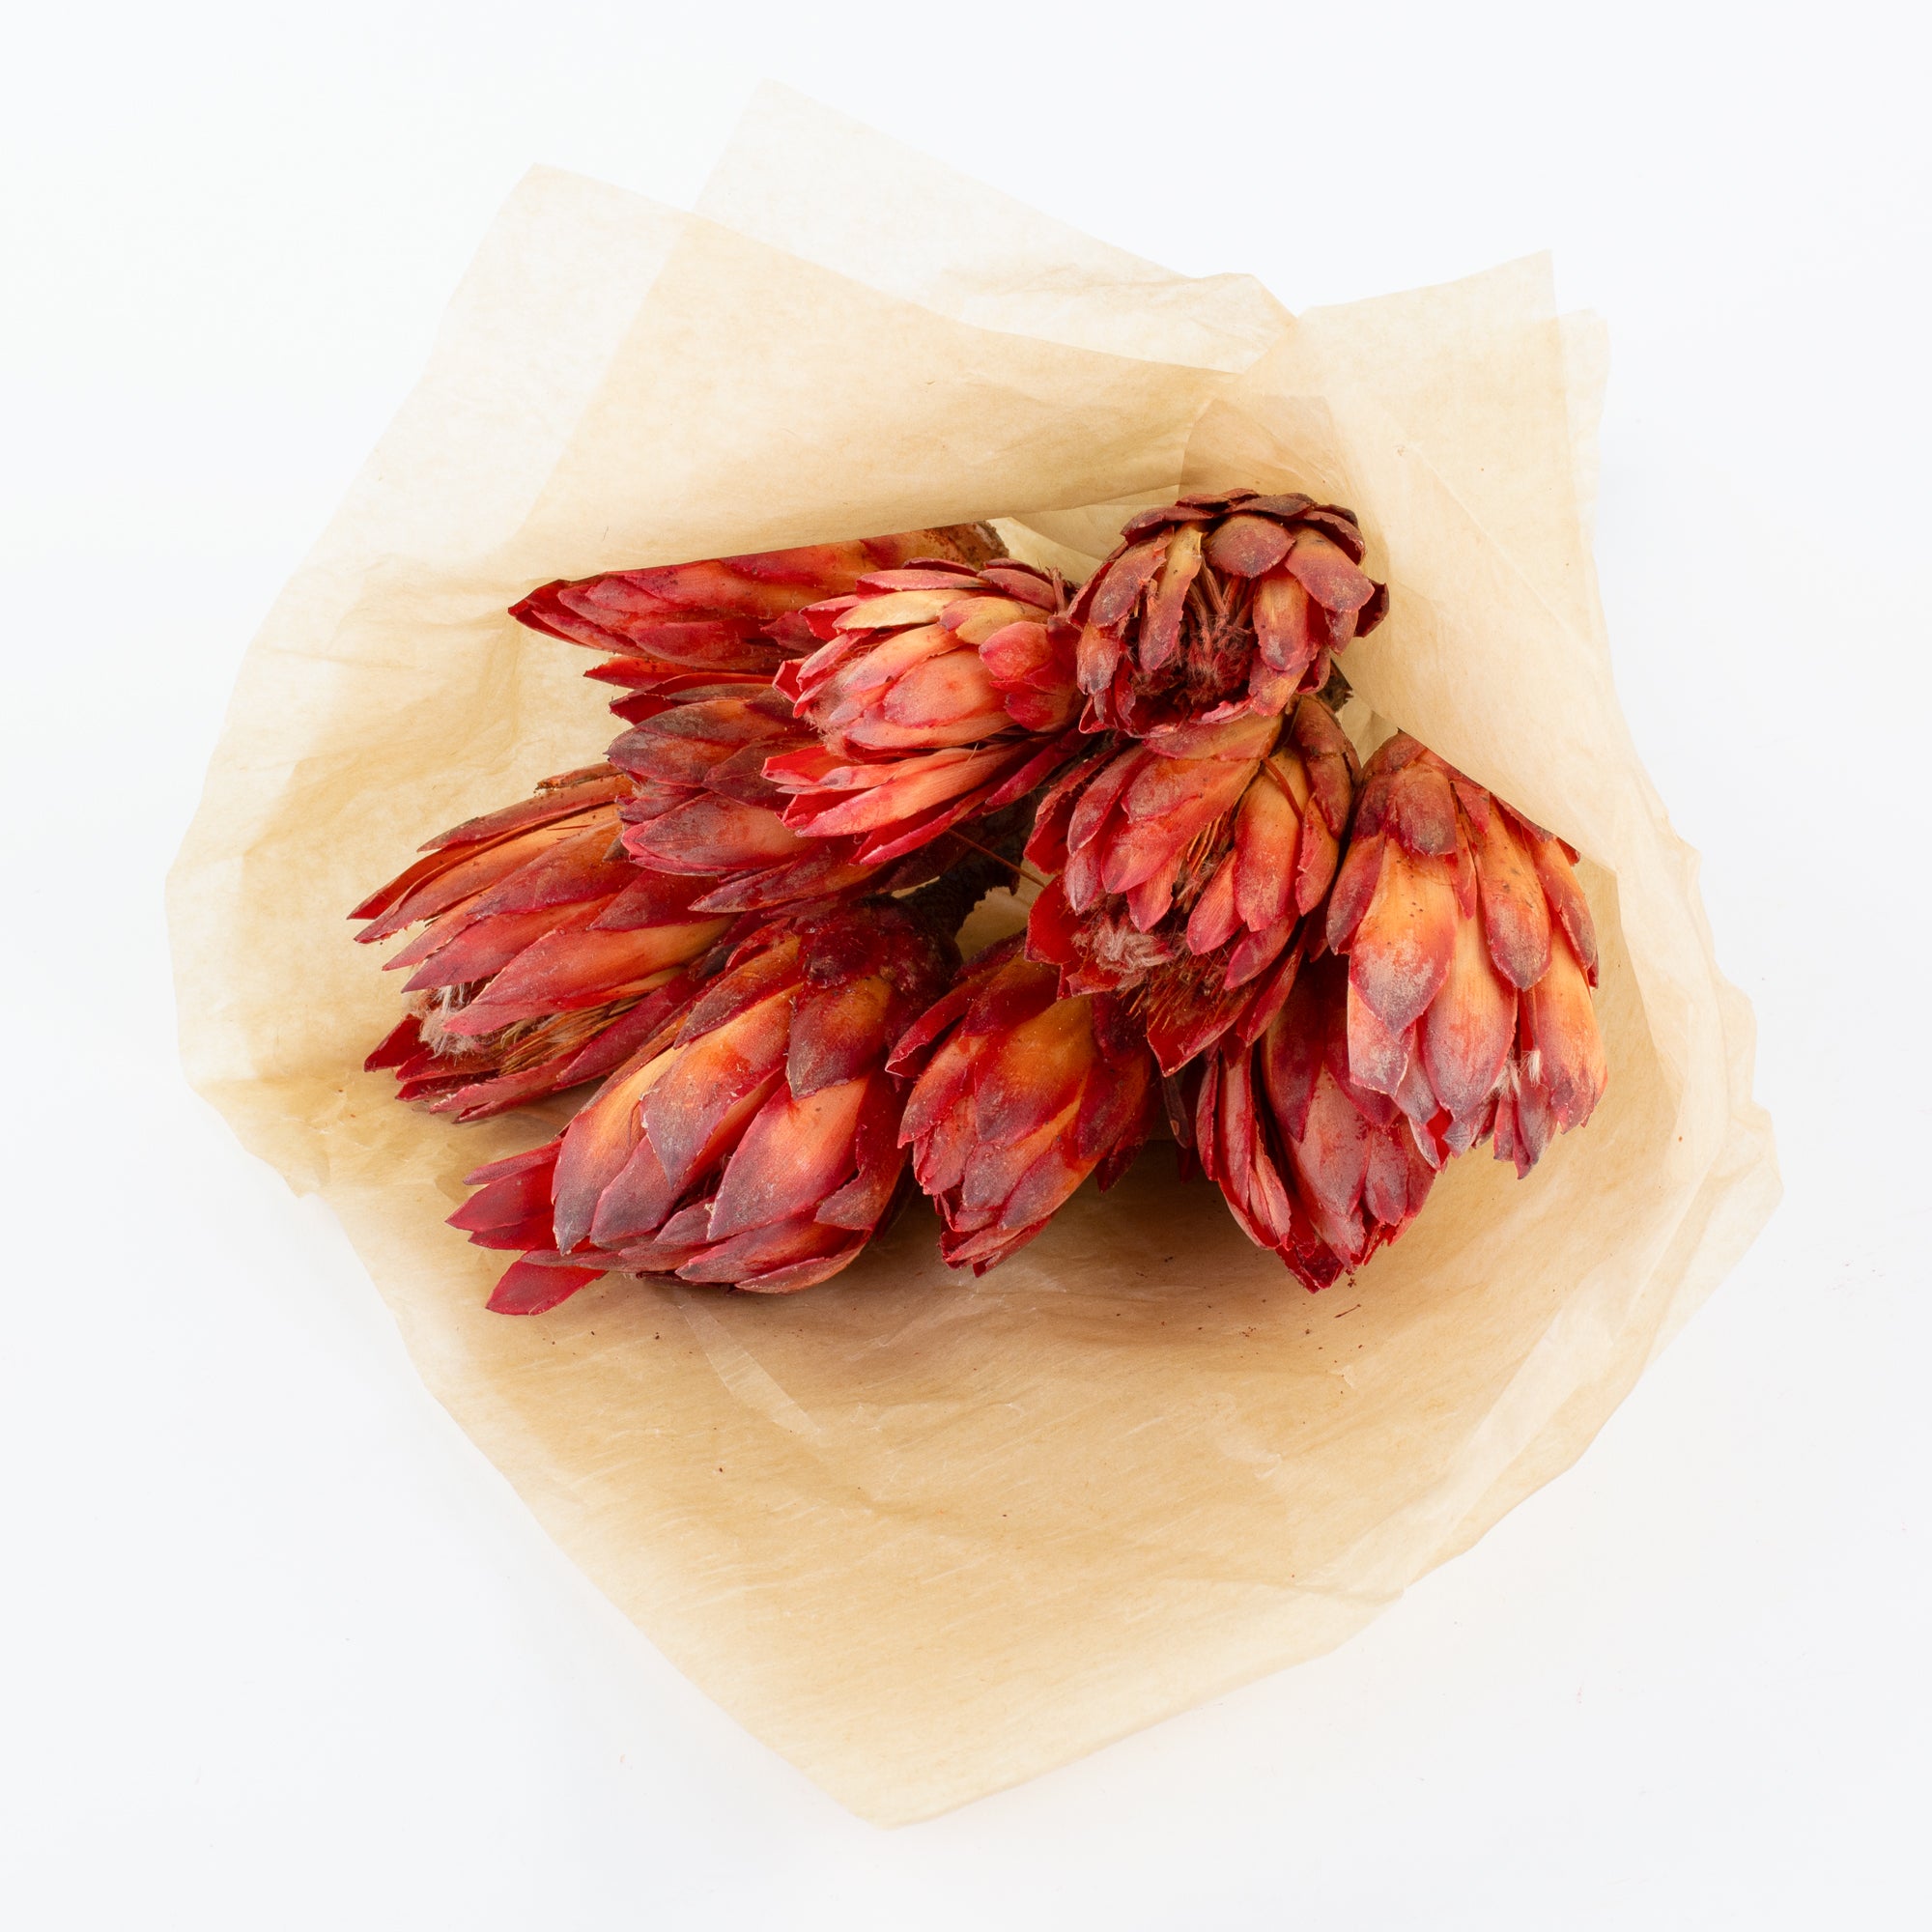 This is an image of a bunch of natural red protea repens pendula